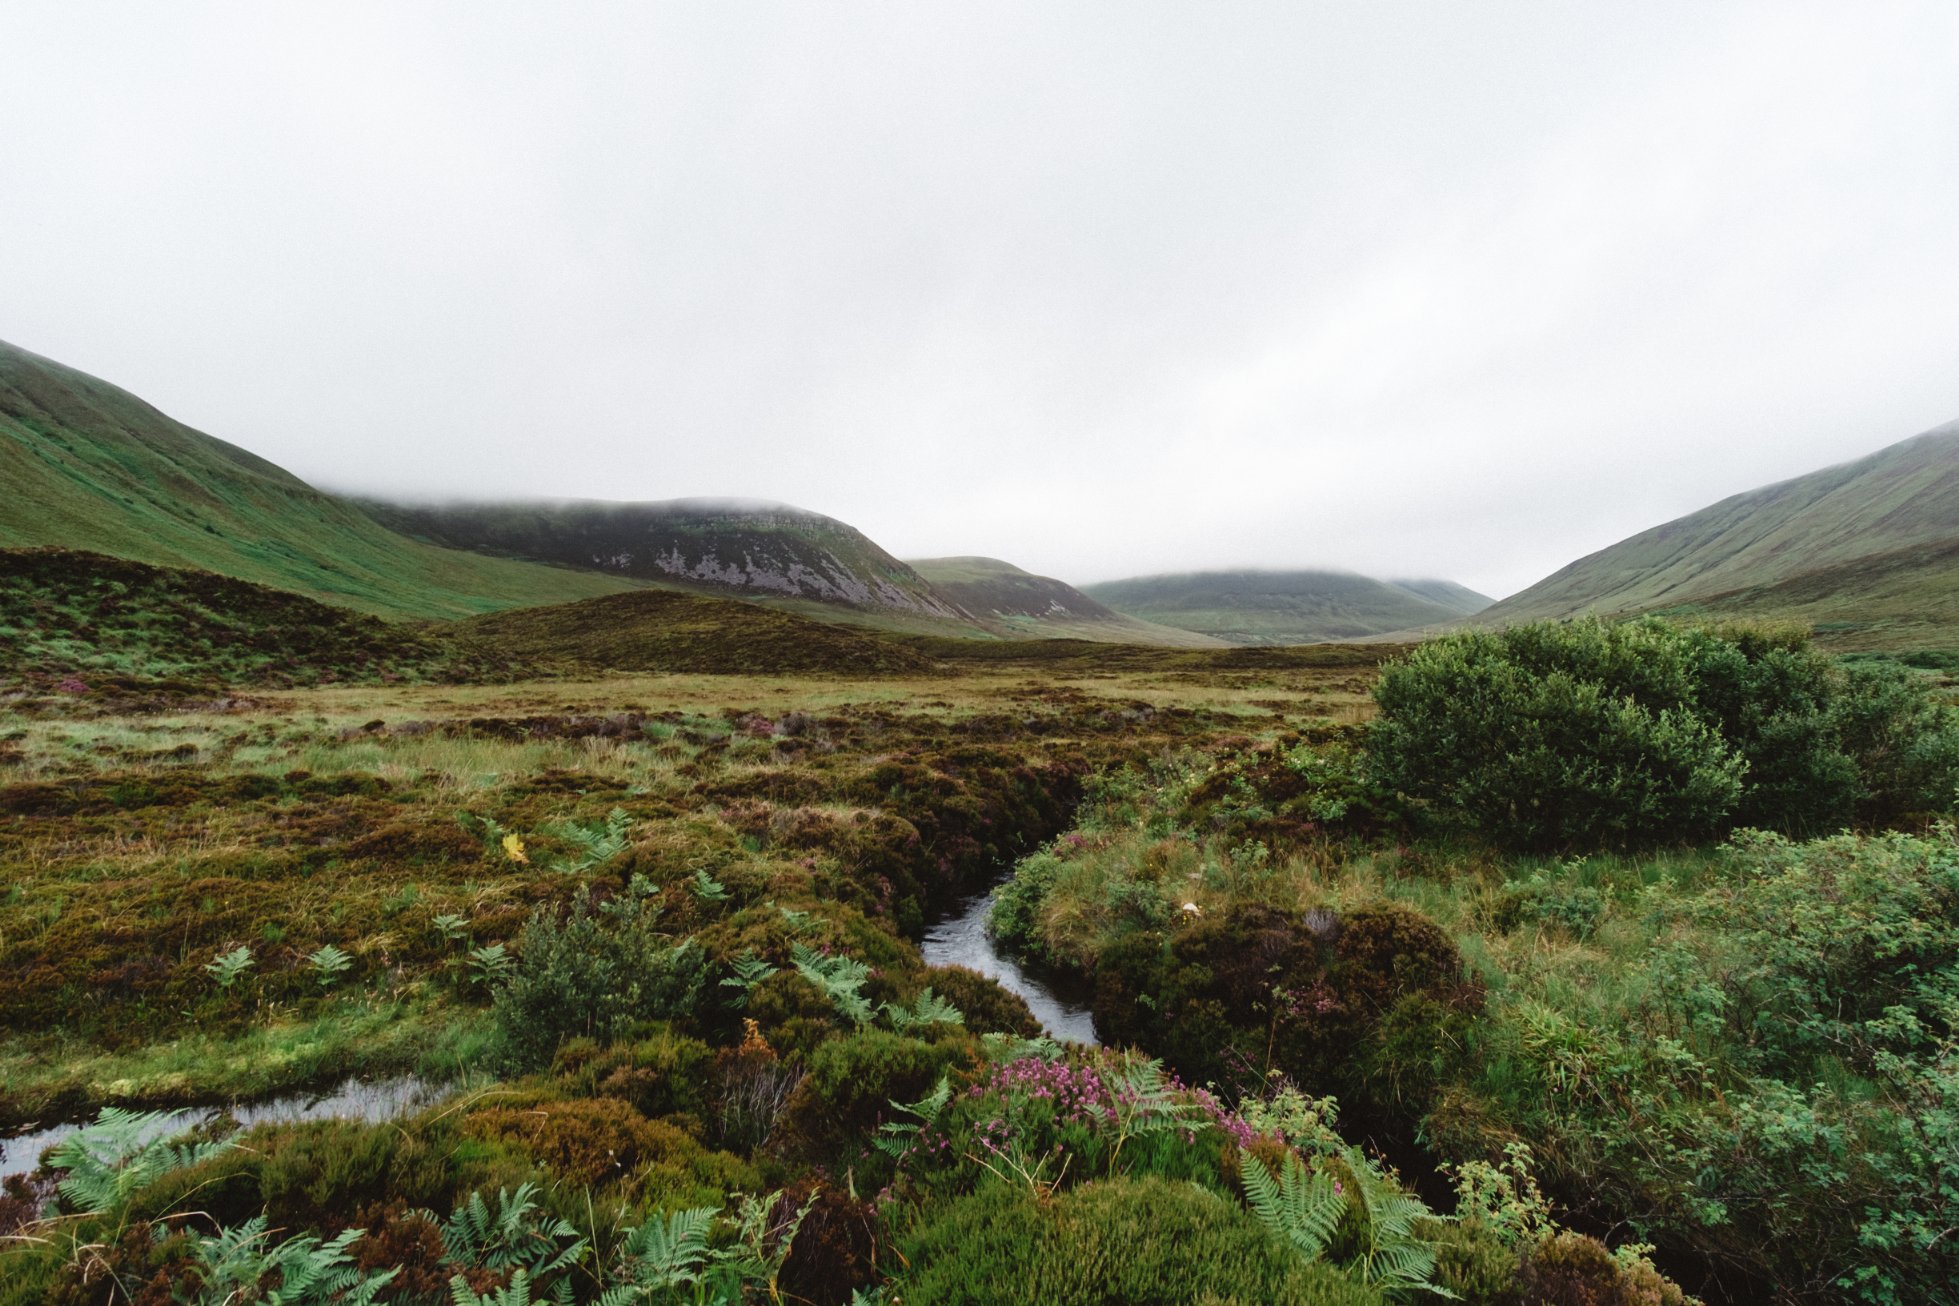 Rackwick valley - image by Tomas Hermoso